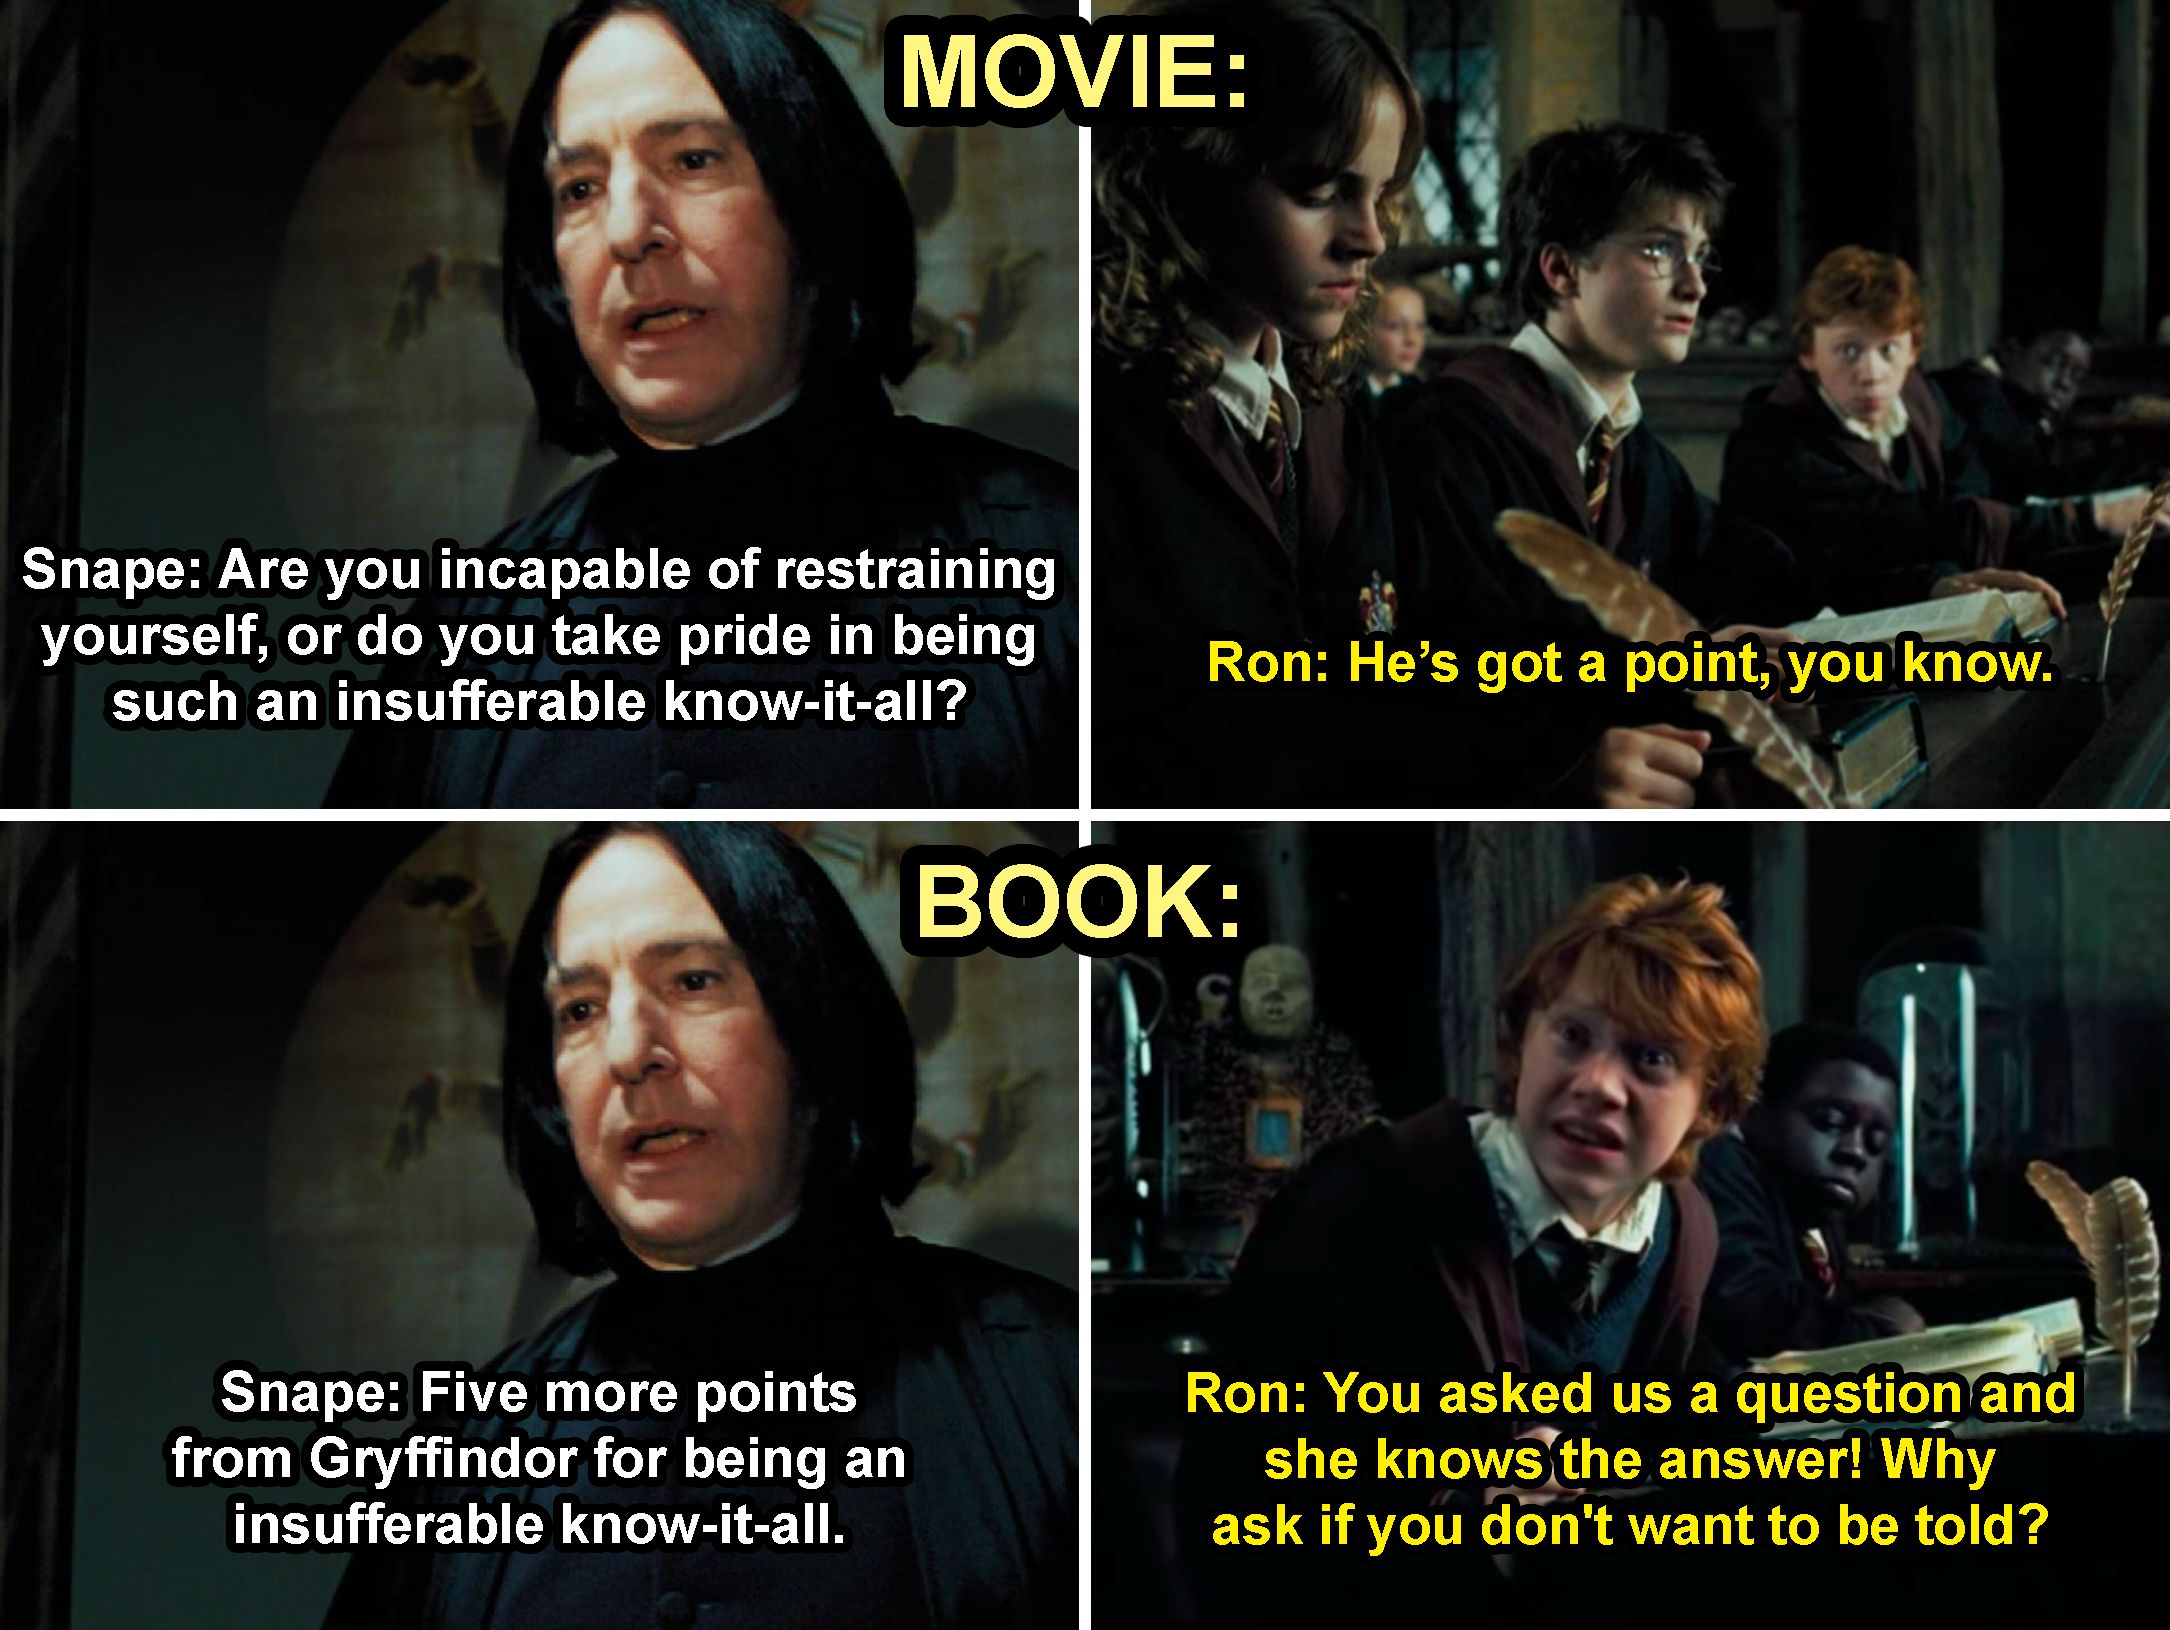 differences between harry potter book 1 and movie